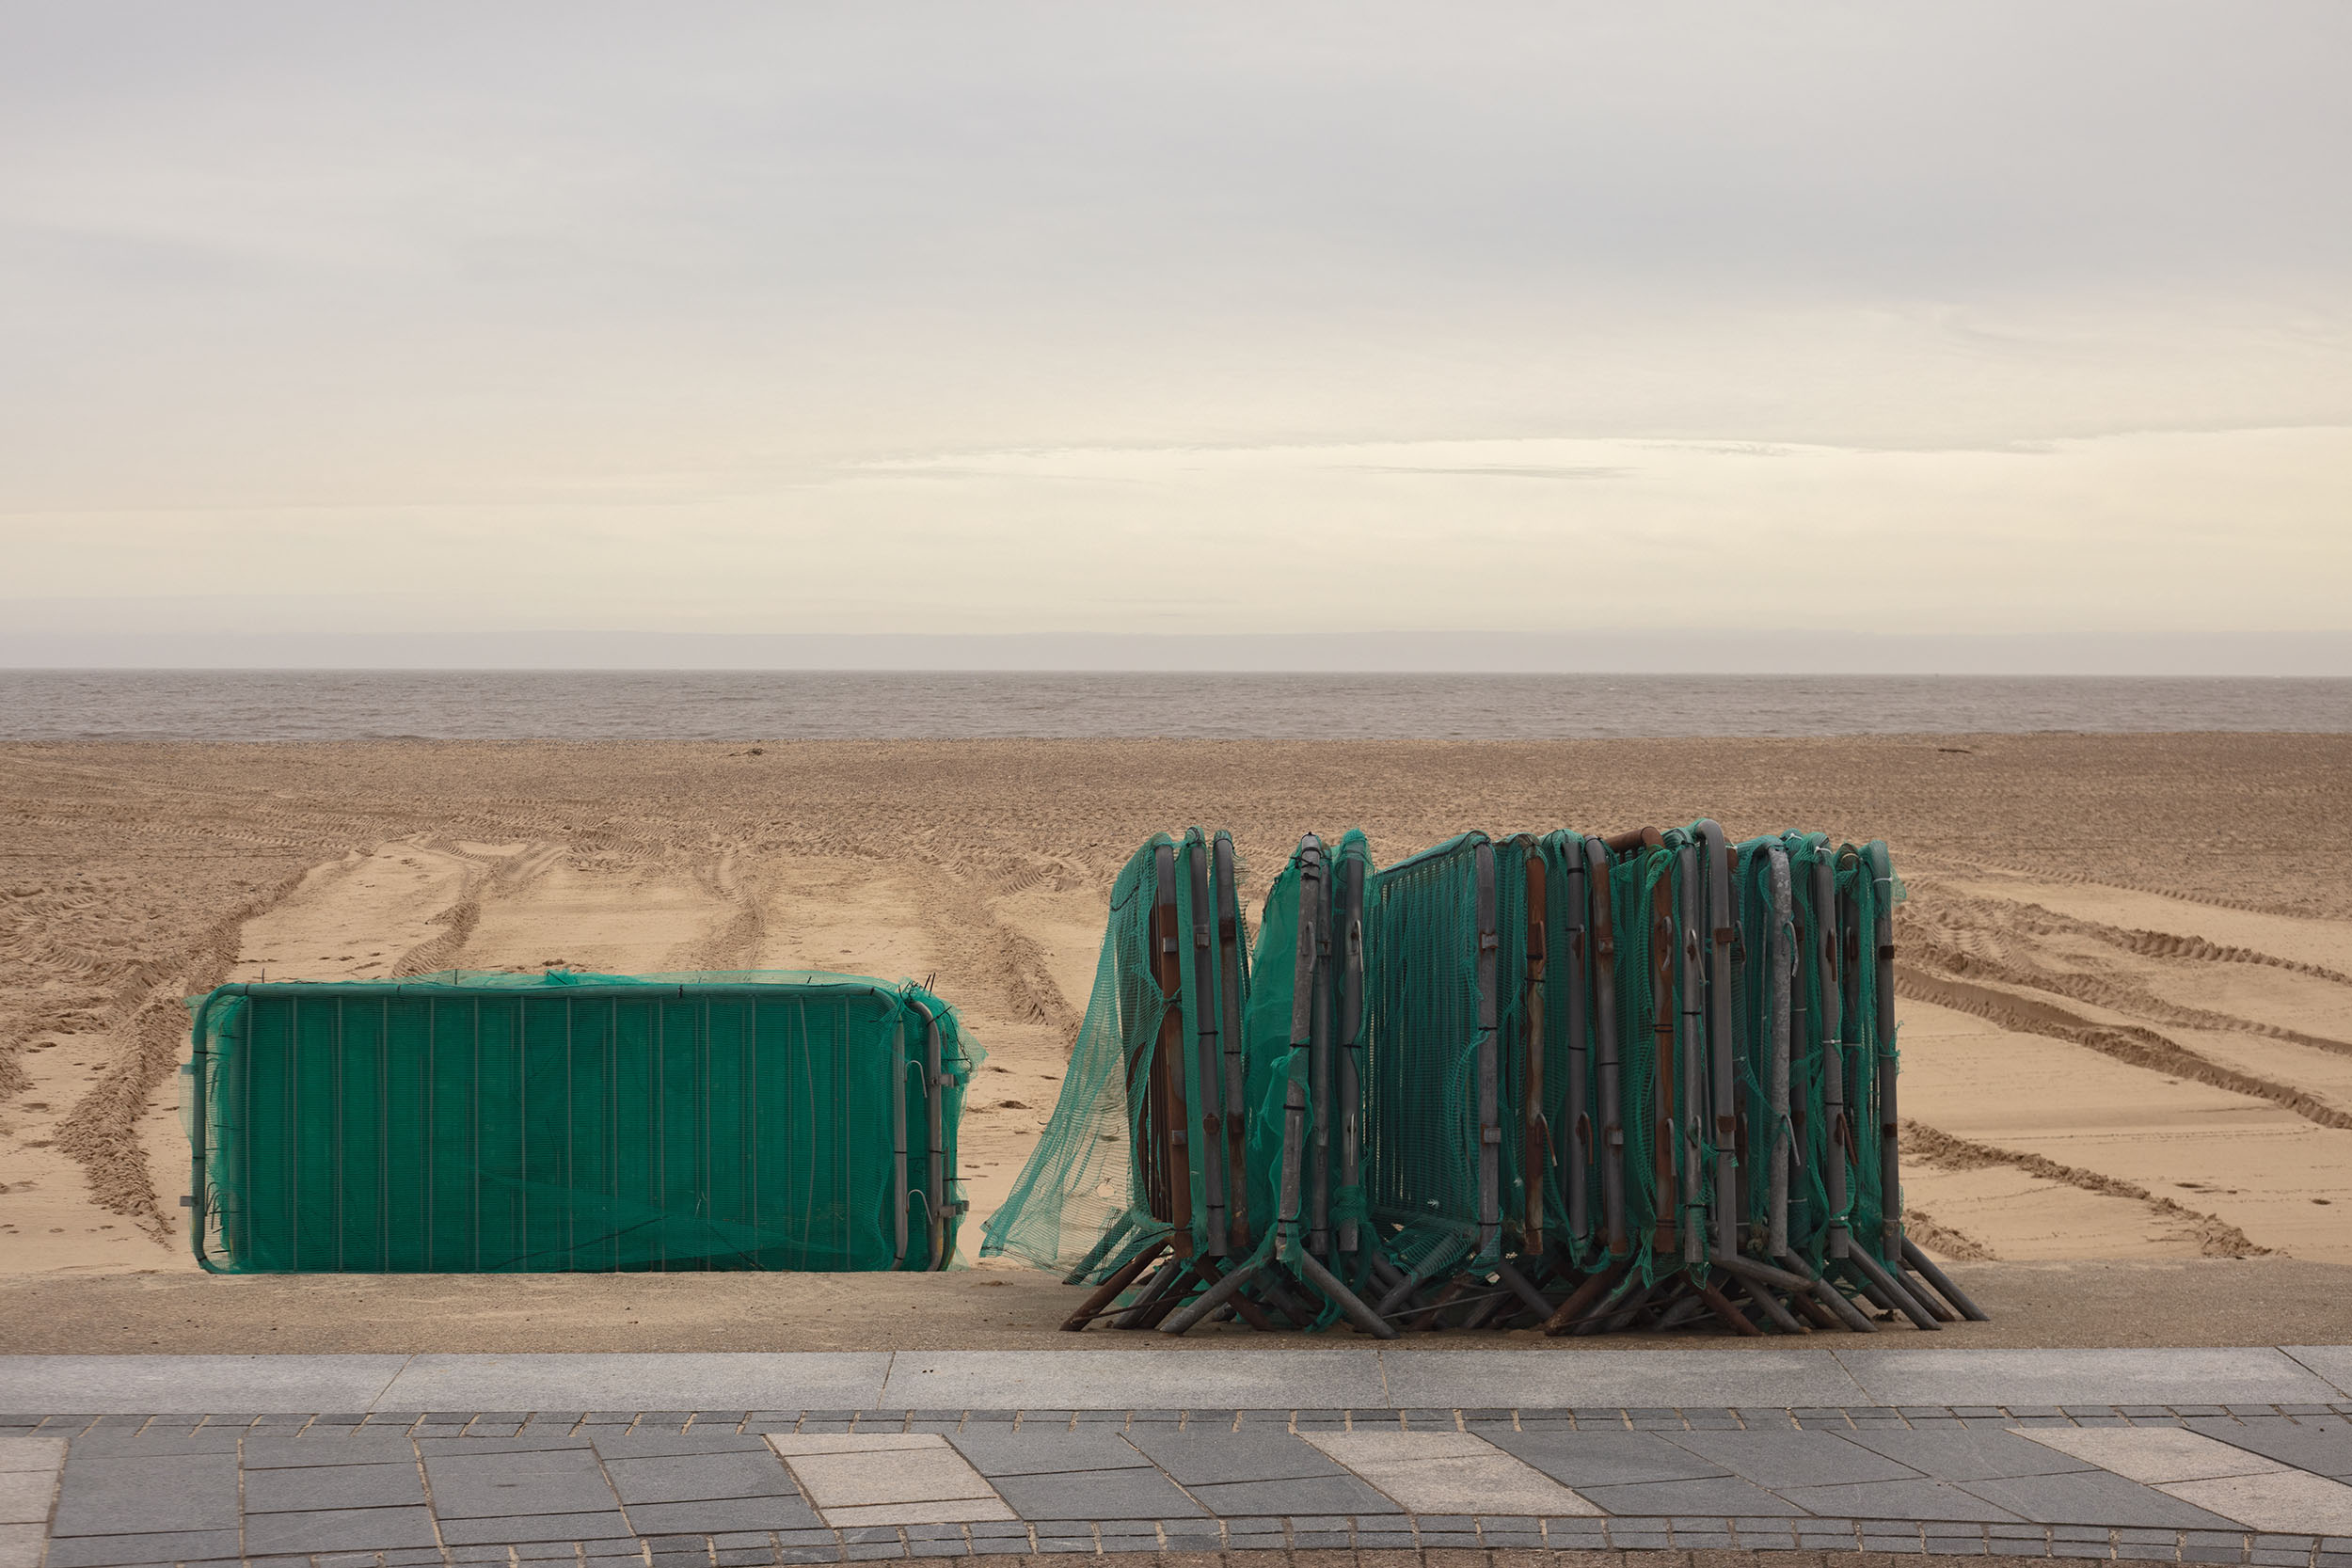 Photograph by Cerys Leahy showing a cluster of temporary fencing set against the beach.